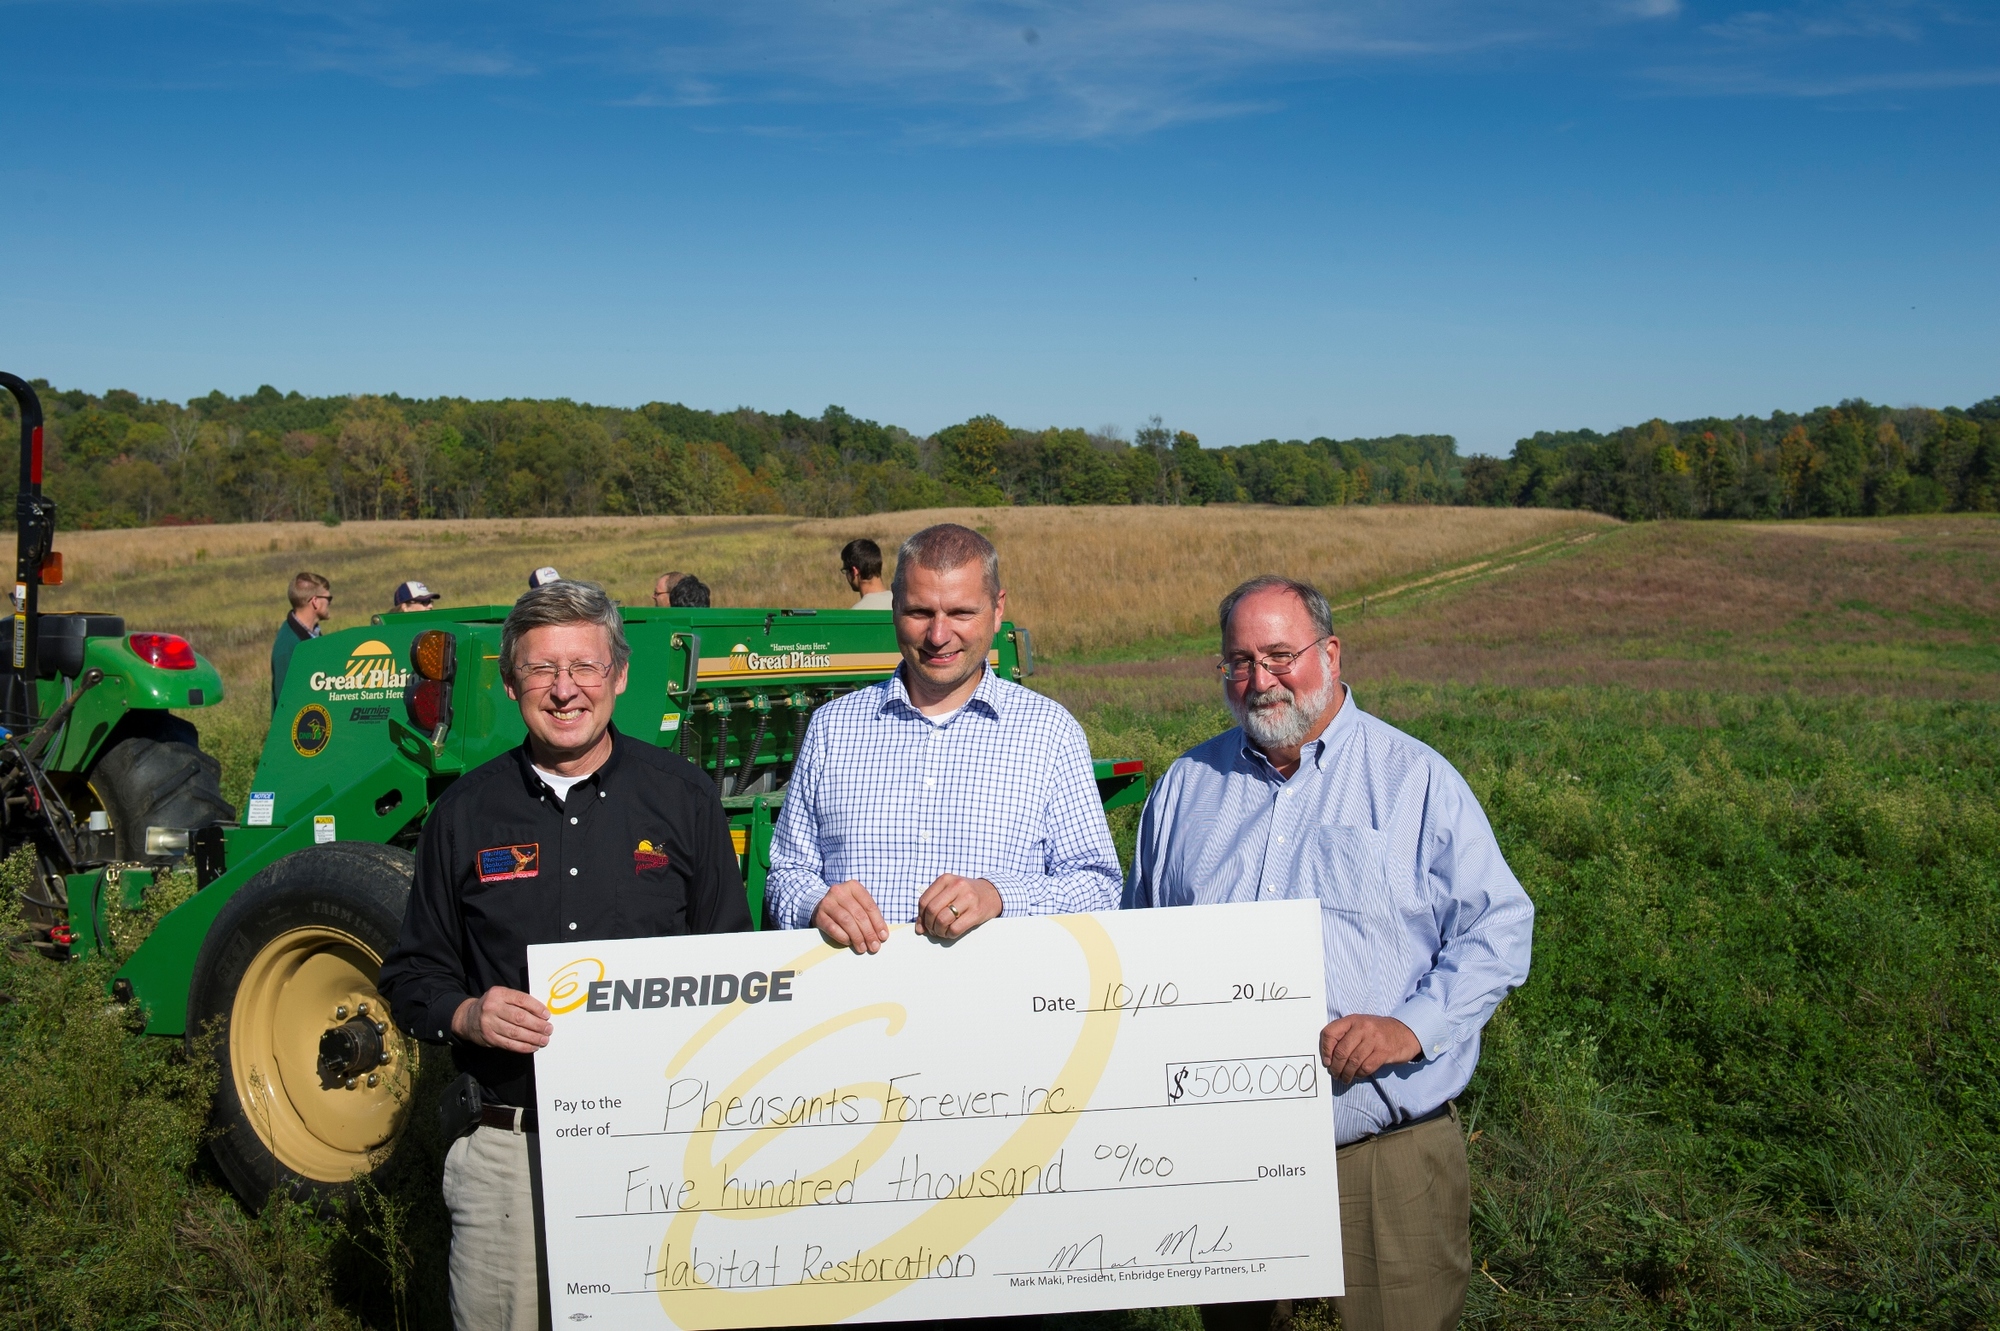 Parties in the cooperative agreement met Monday at the Crane Pond State Game Area to celebrate the pact providing $550,000 for pheasant habitat.